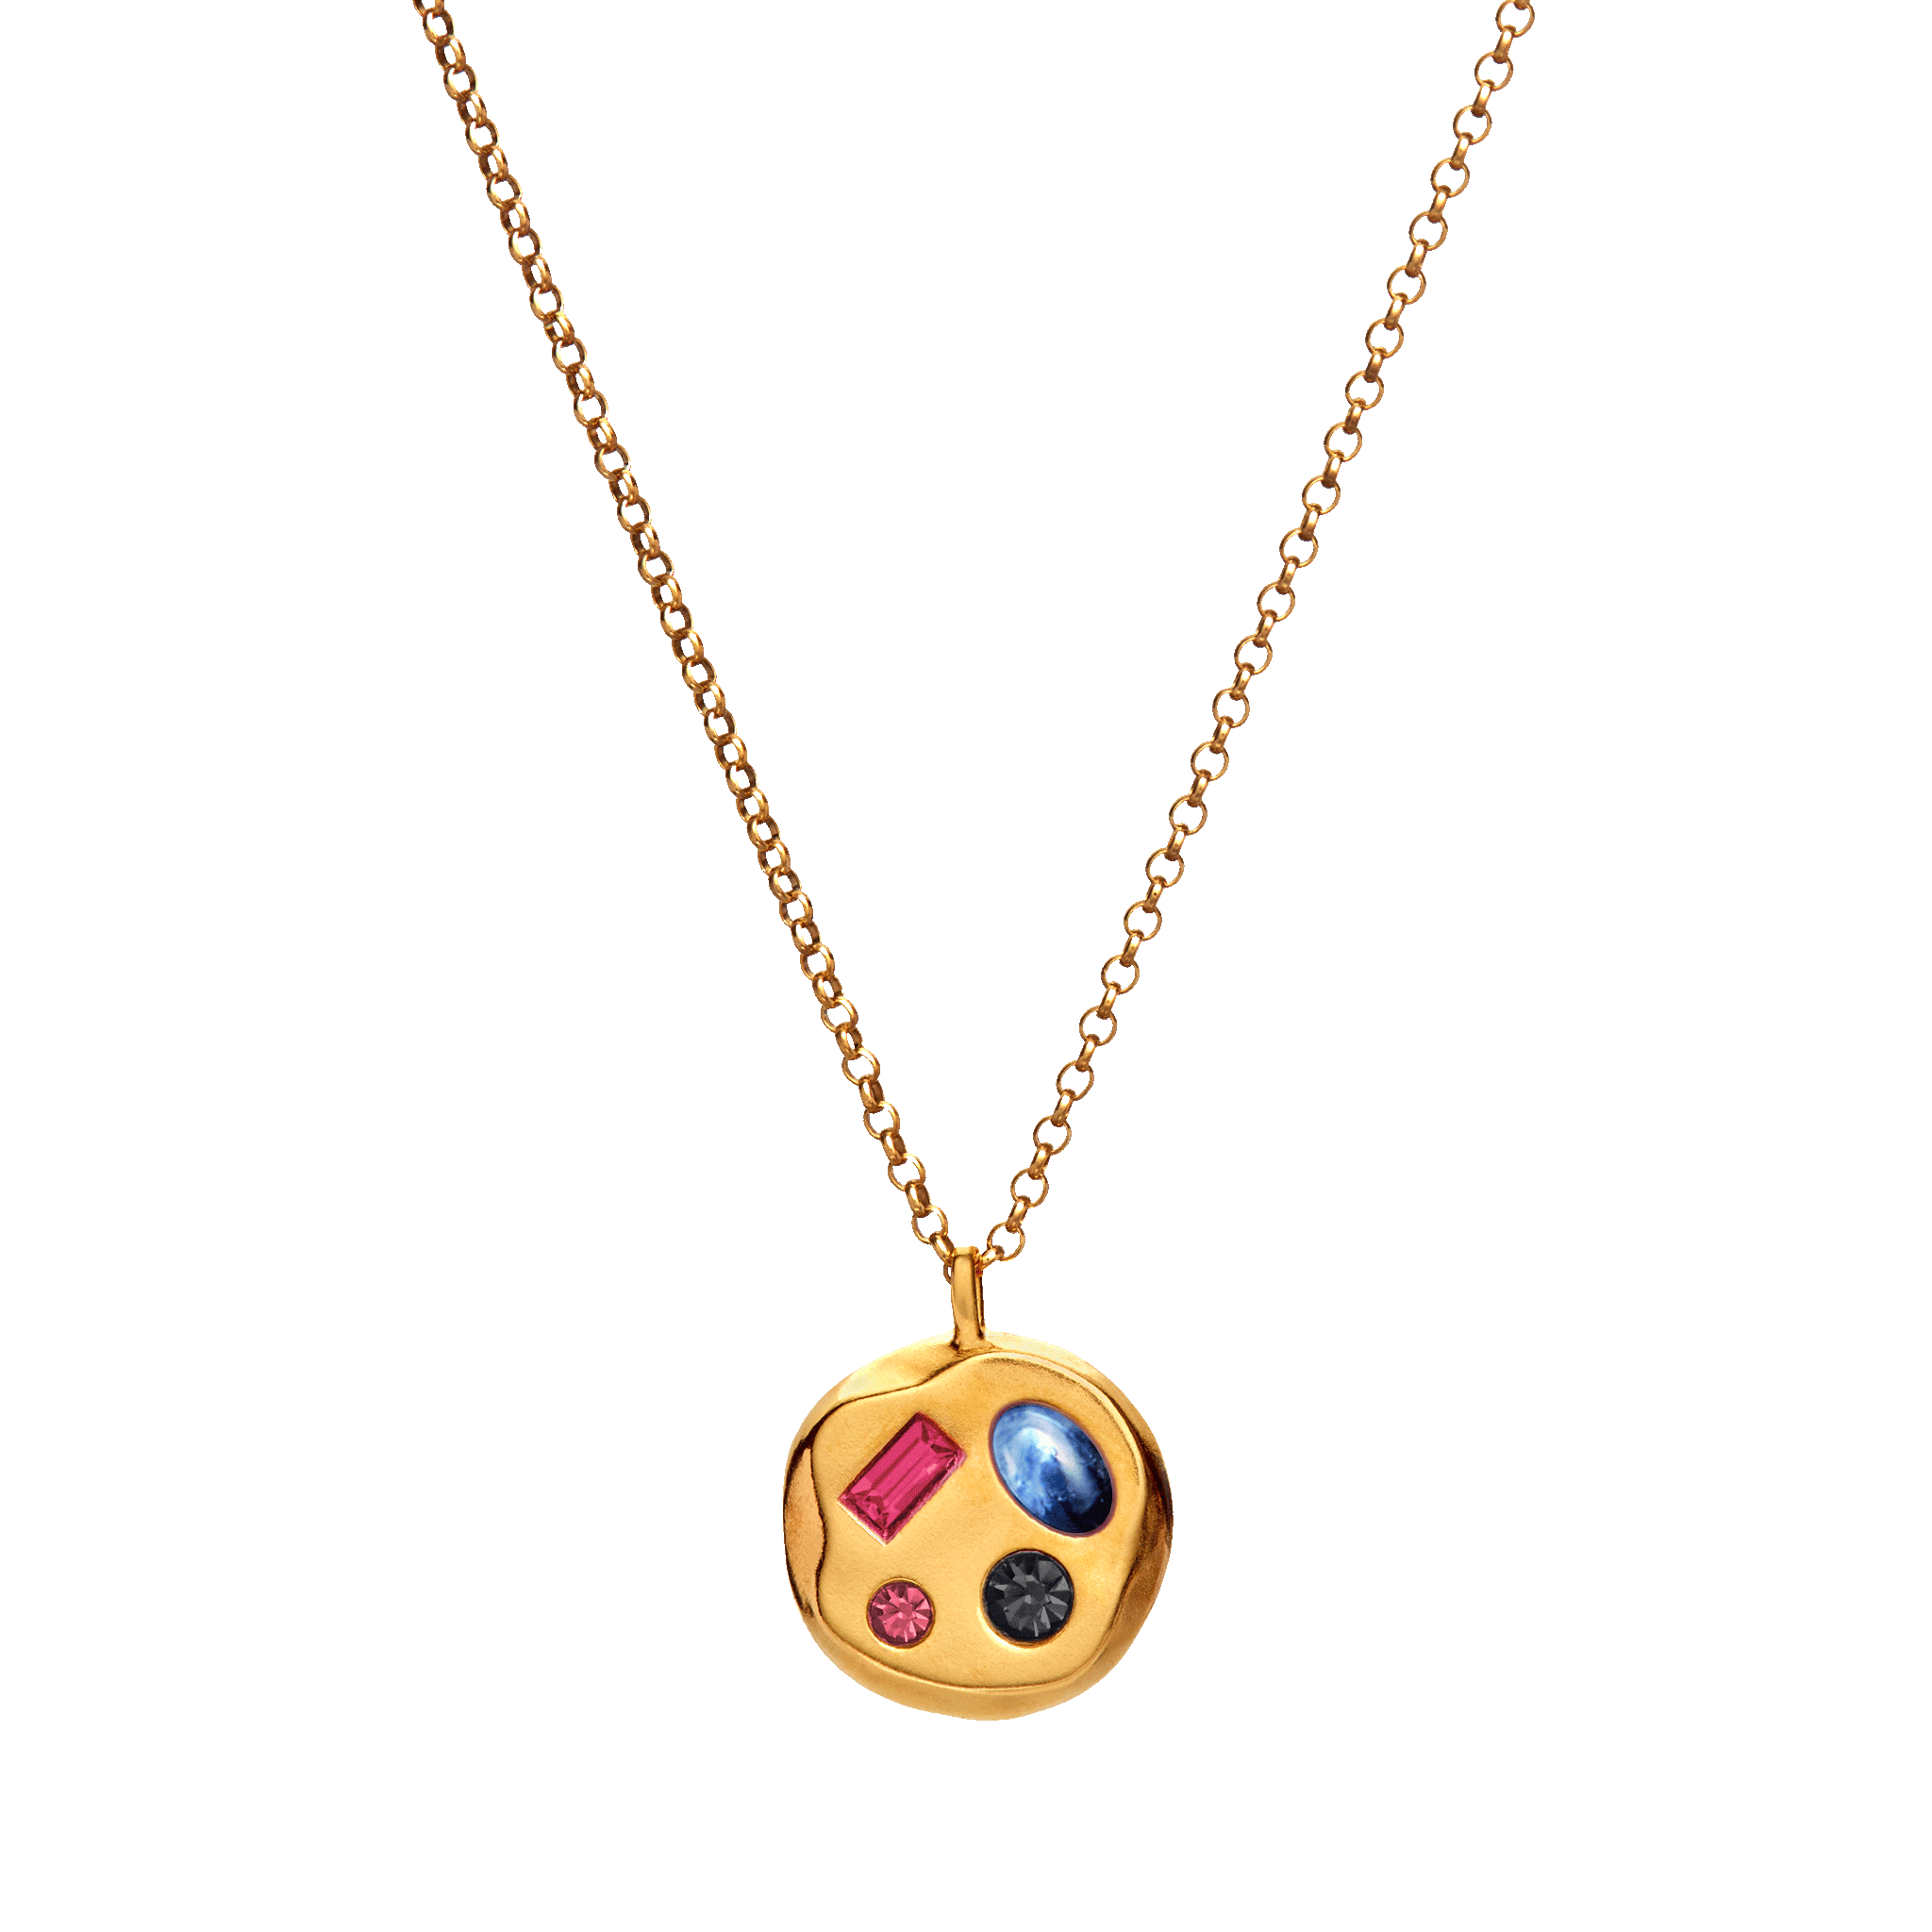 The July Eleventh Pendant